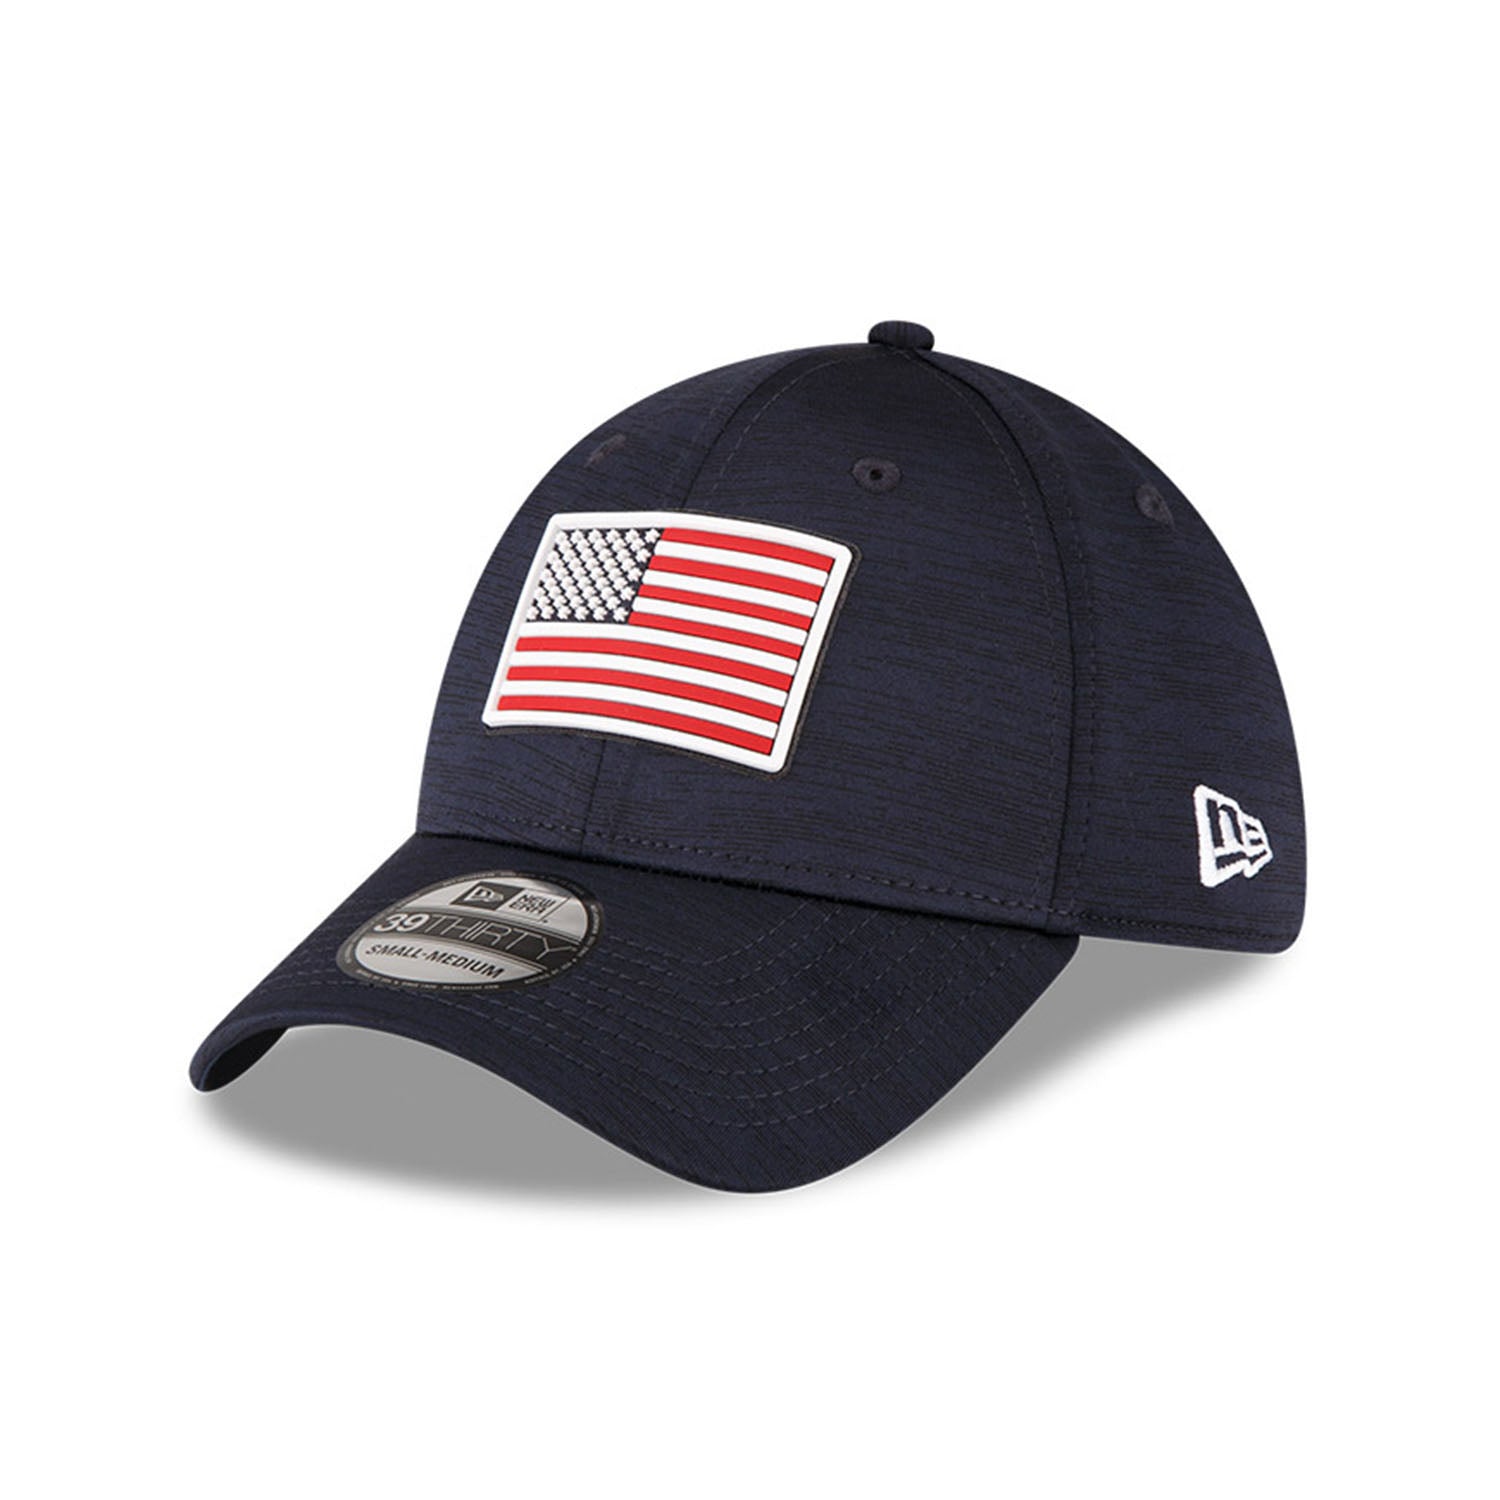 2023 Ryder Cup Welcome to The Team Golfer Hat, by New Era